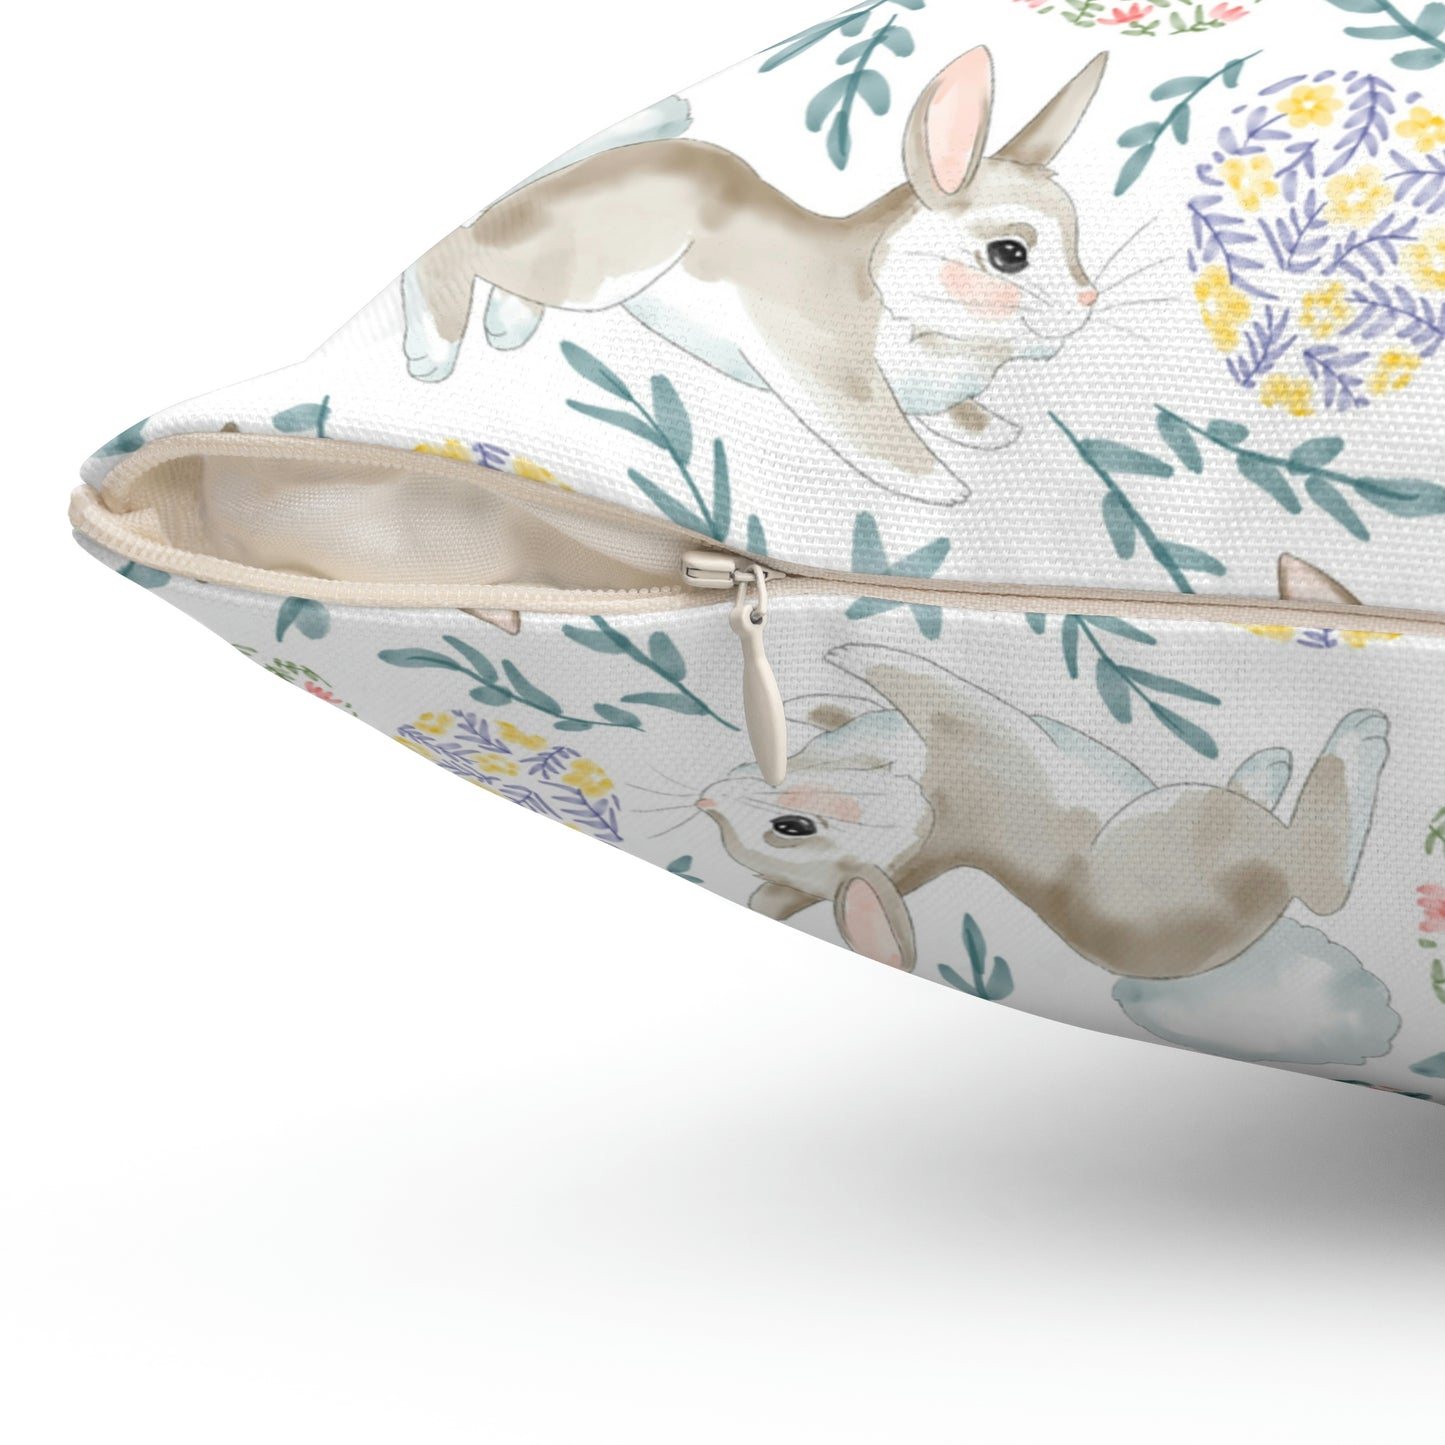 Bunnies and Easter Eggs Throw Pillow